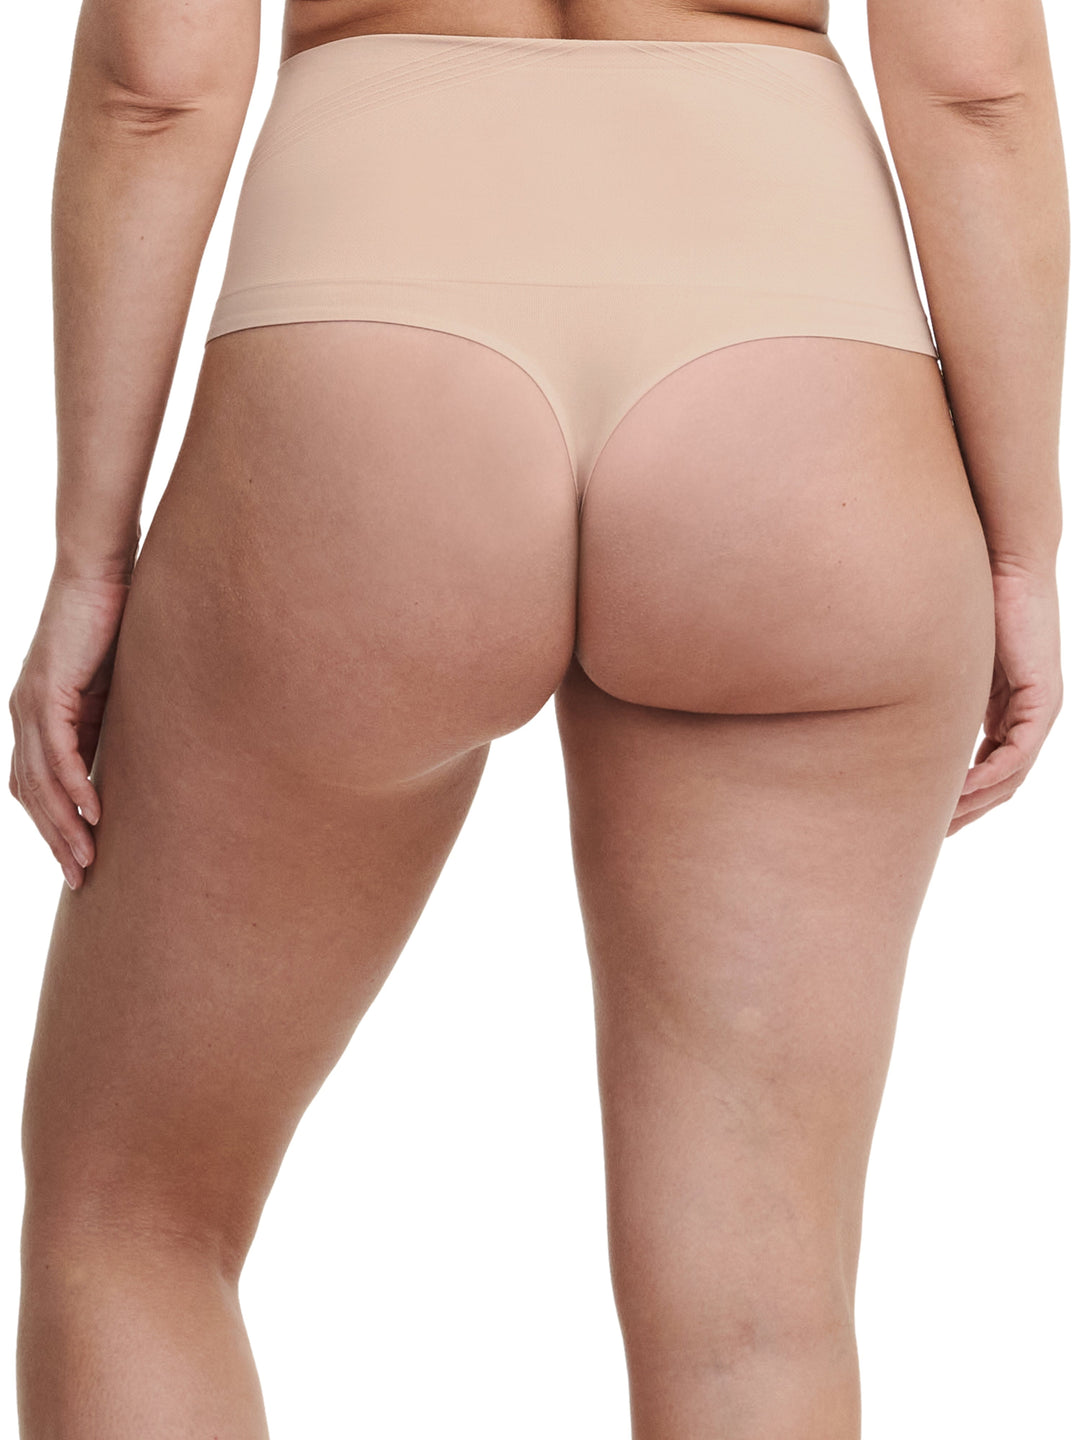 Chantelle Smooth Comfort Sculpting Tanga mit hoher Taille – Sirocco Thong Chantelle